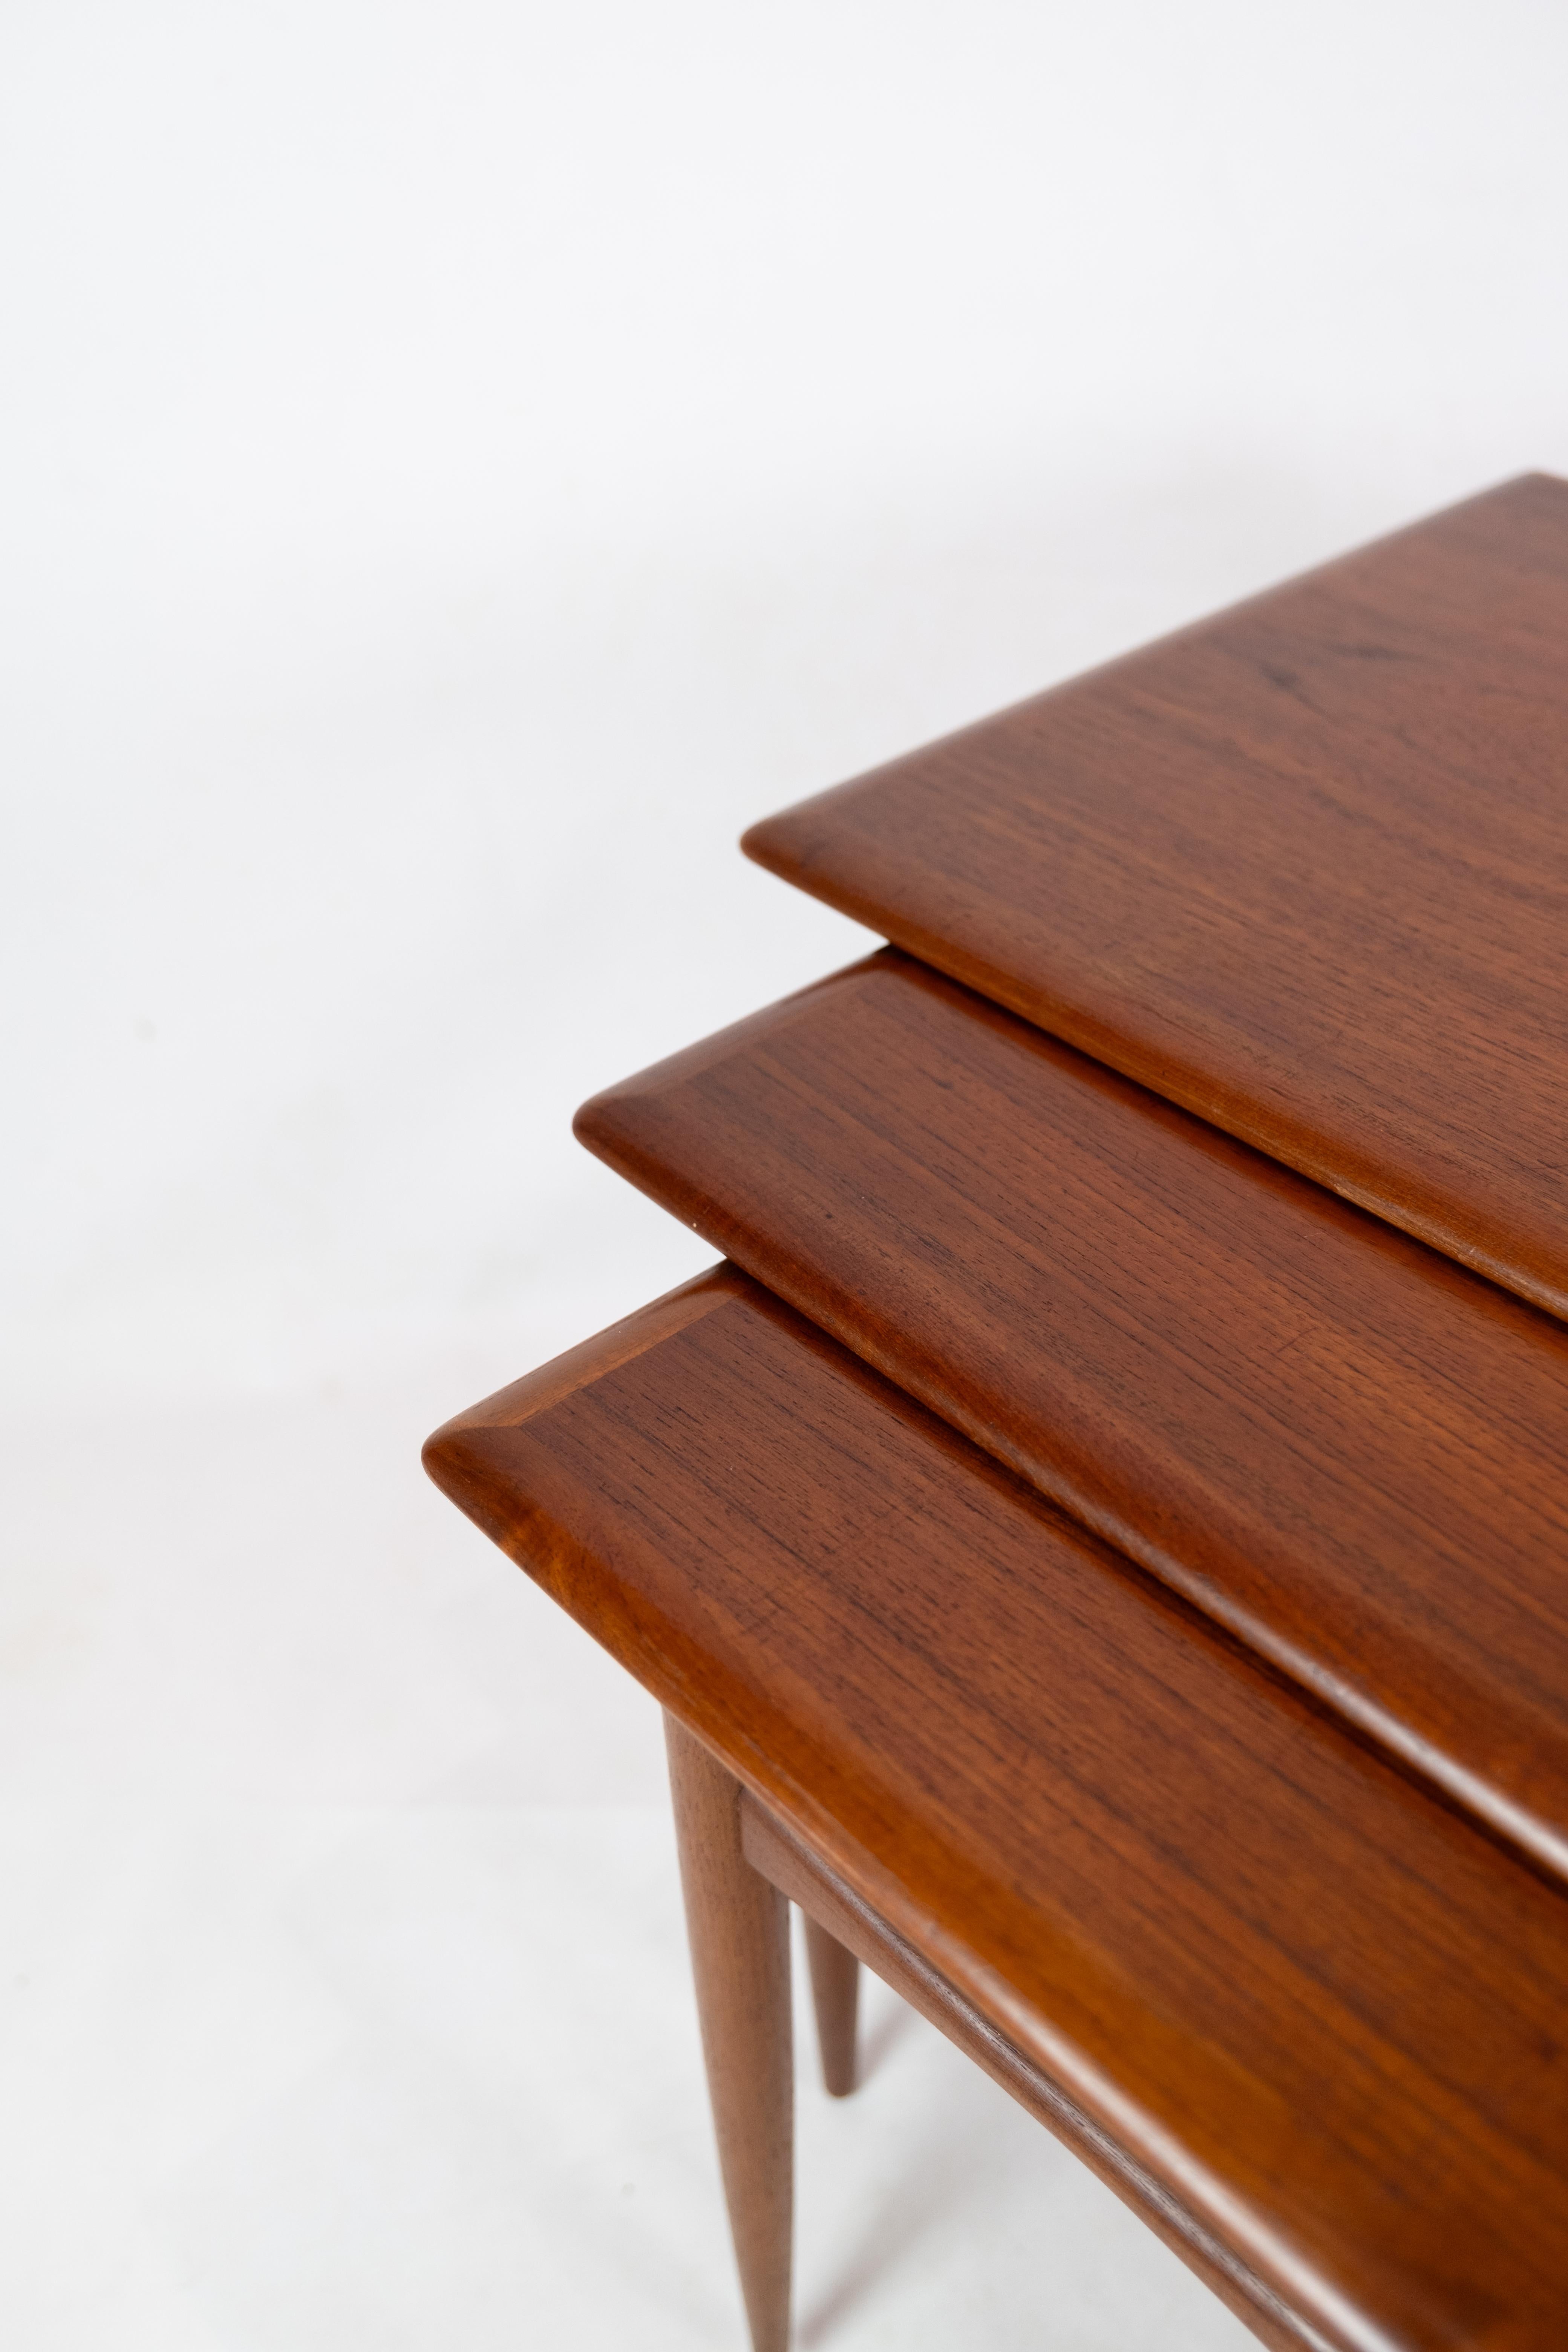 Nesting Tables / Stacking Tables of Danish Design in Teak Wood From The 1960's  In Good Condition For Sale In Lejre, DK